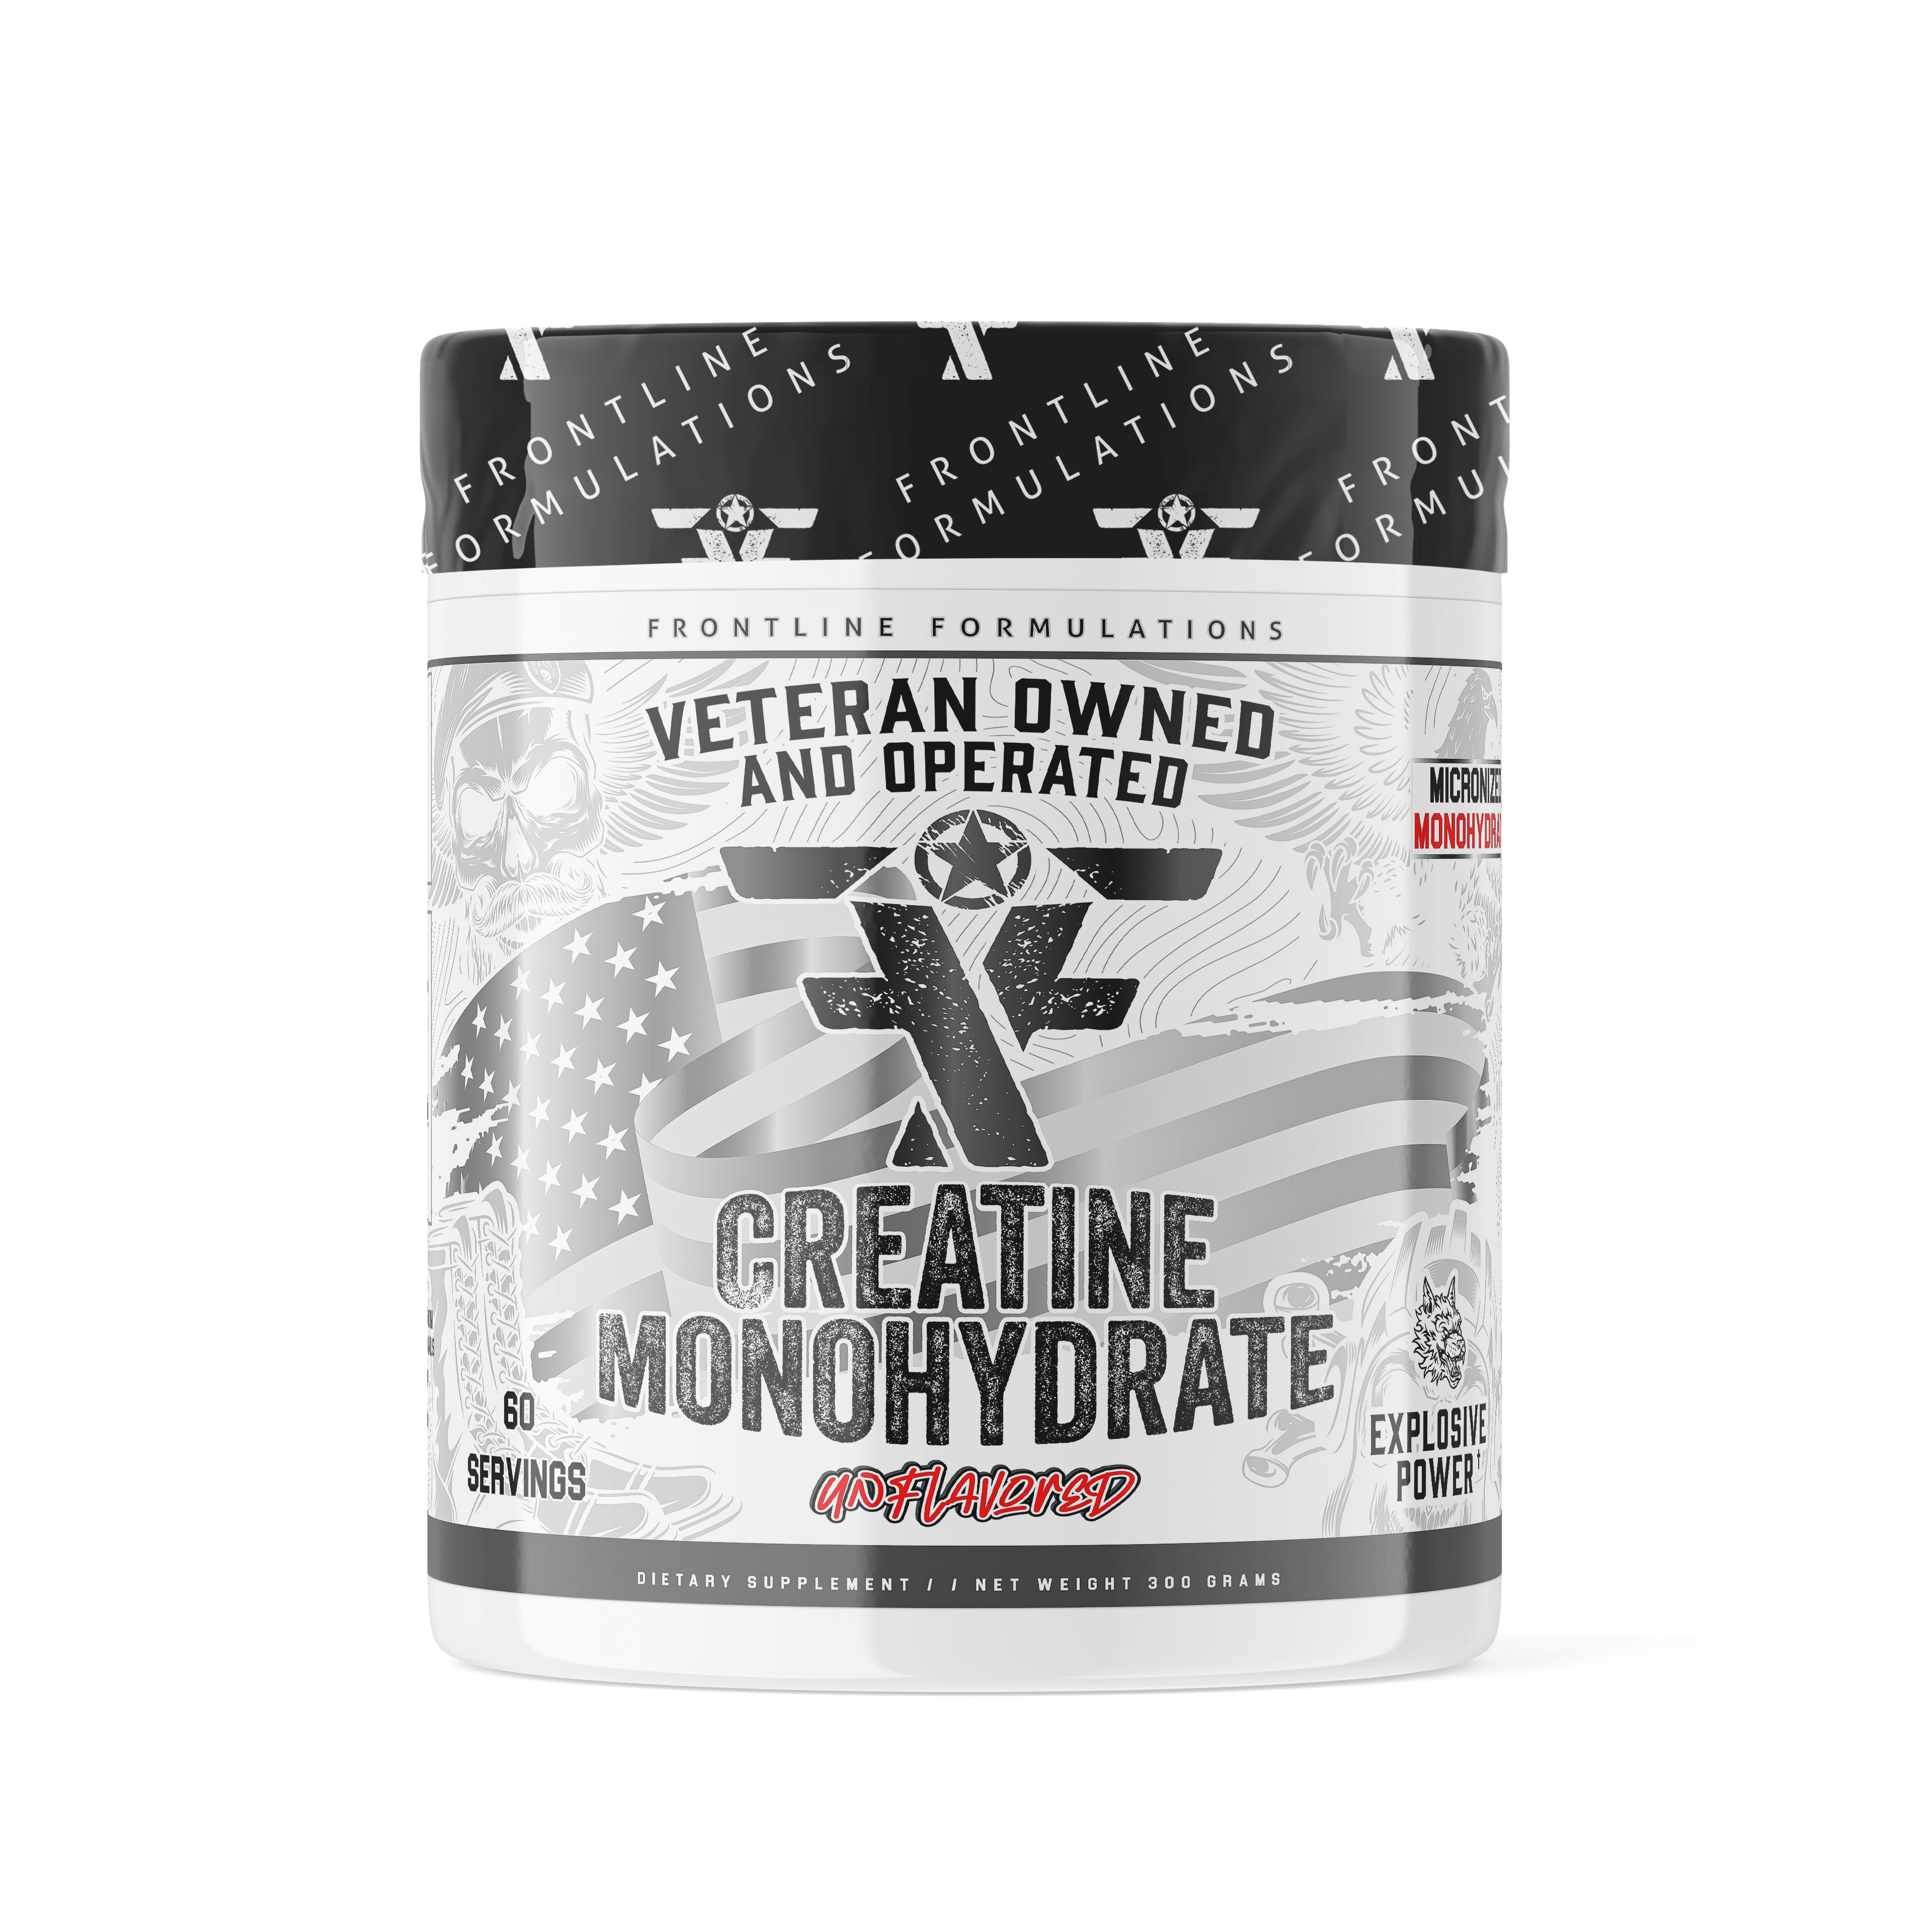 Creatine Monohydrate Creatine Monohydrate Great for buffering lactic acid to keep the power flowing and those reps plentiful! Dissolves quickly and easily with no stomach cramping or that typical pesky creatine bloat! Helps increase muscle cell volume and